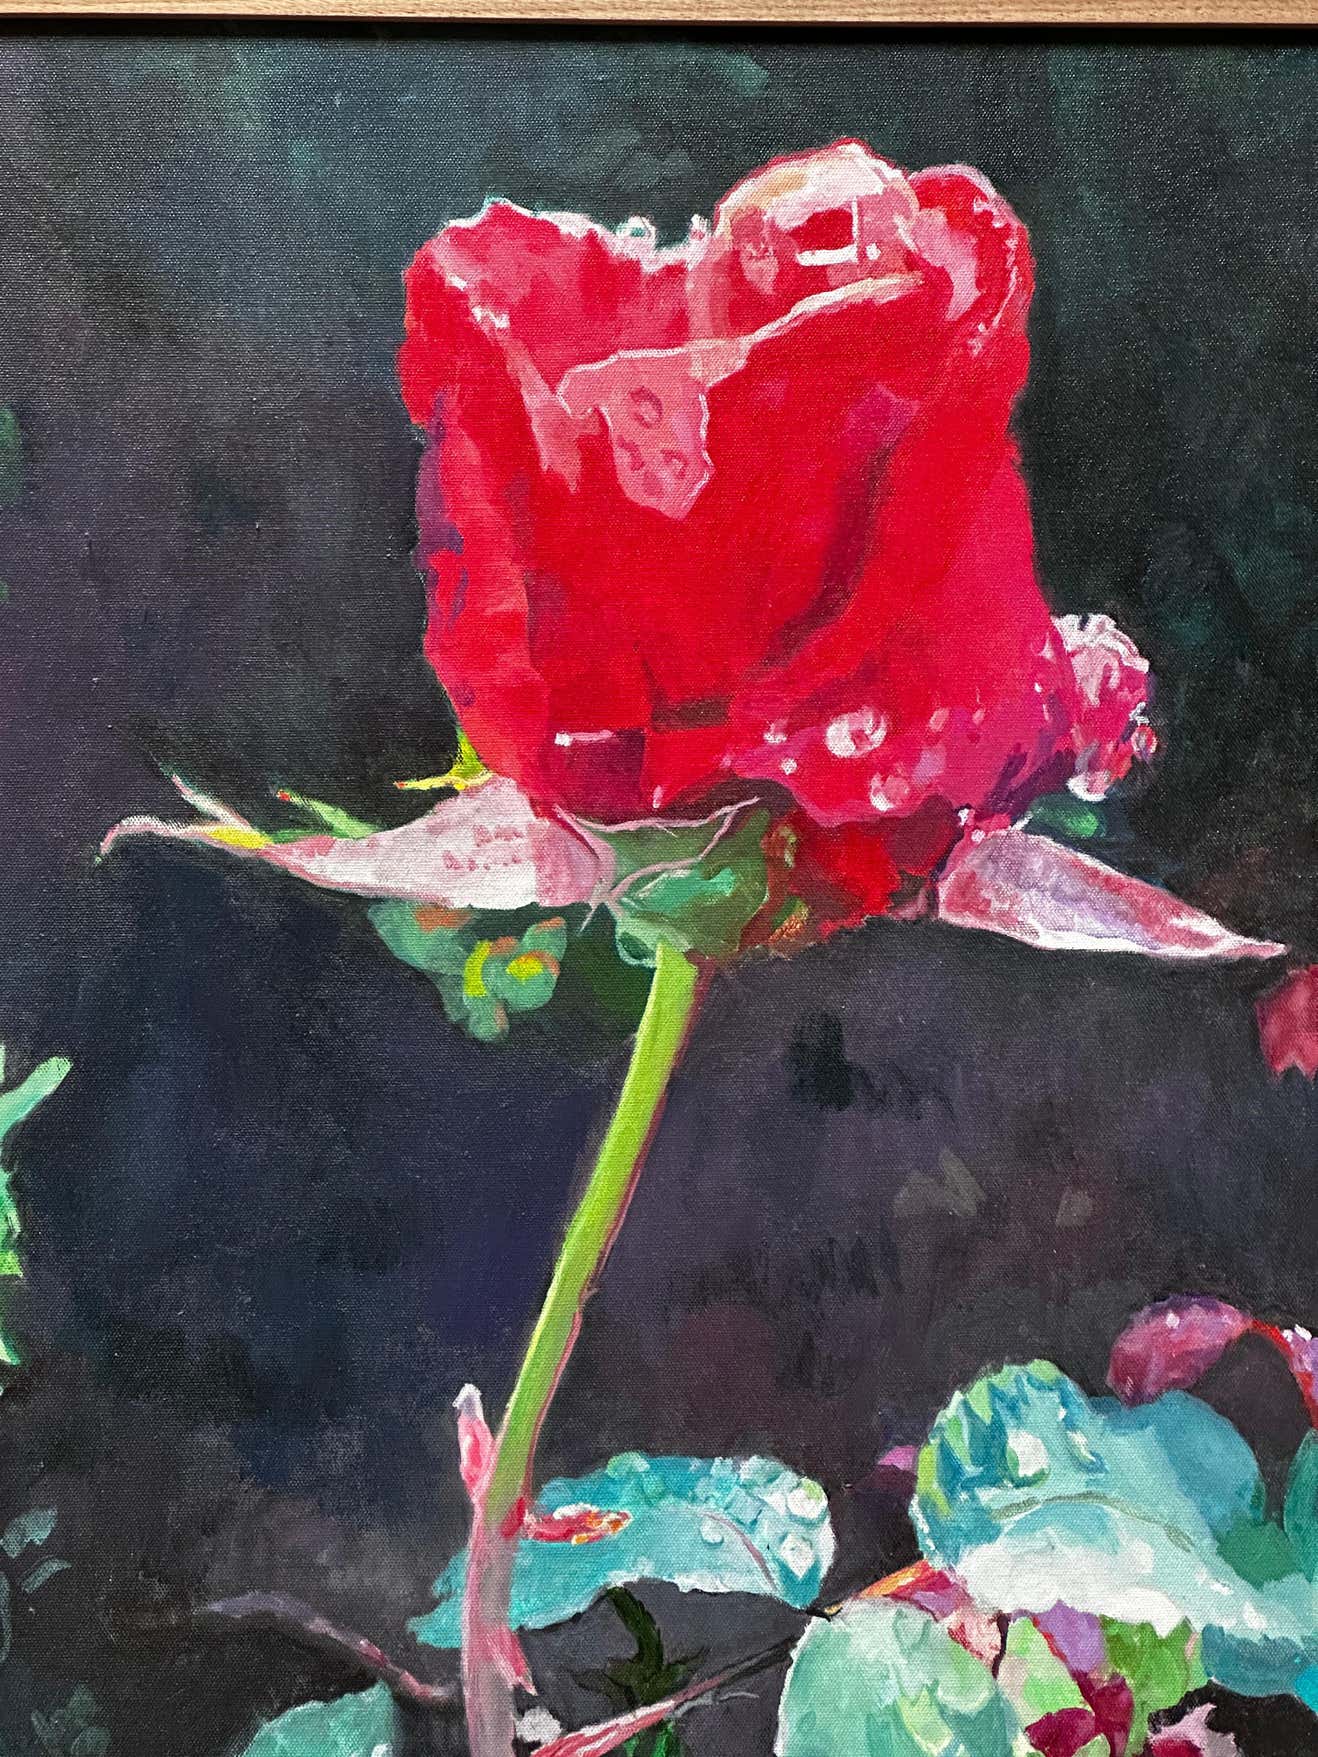 Red Rose on a Black Background Naturalistic Oil on Canvas by Pat Berger